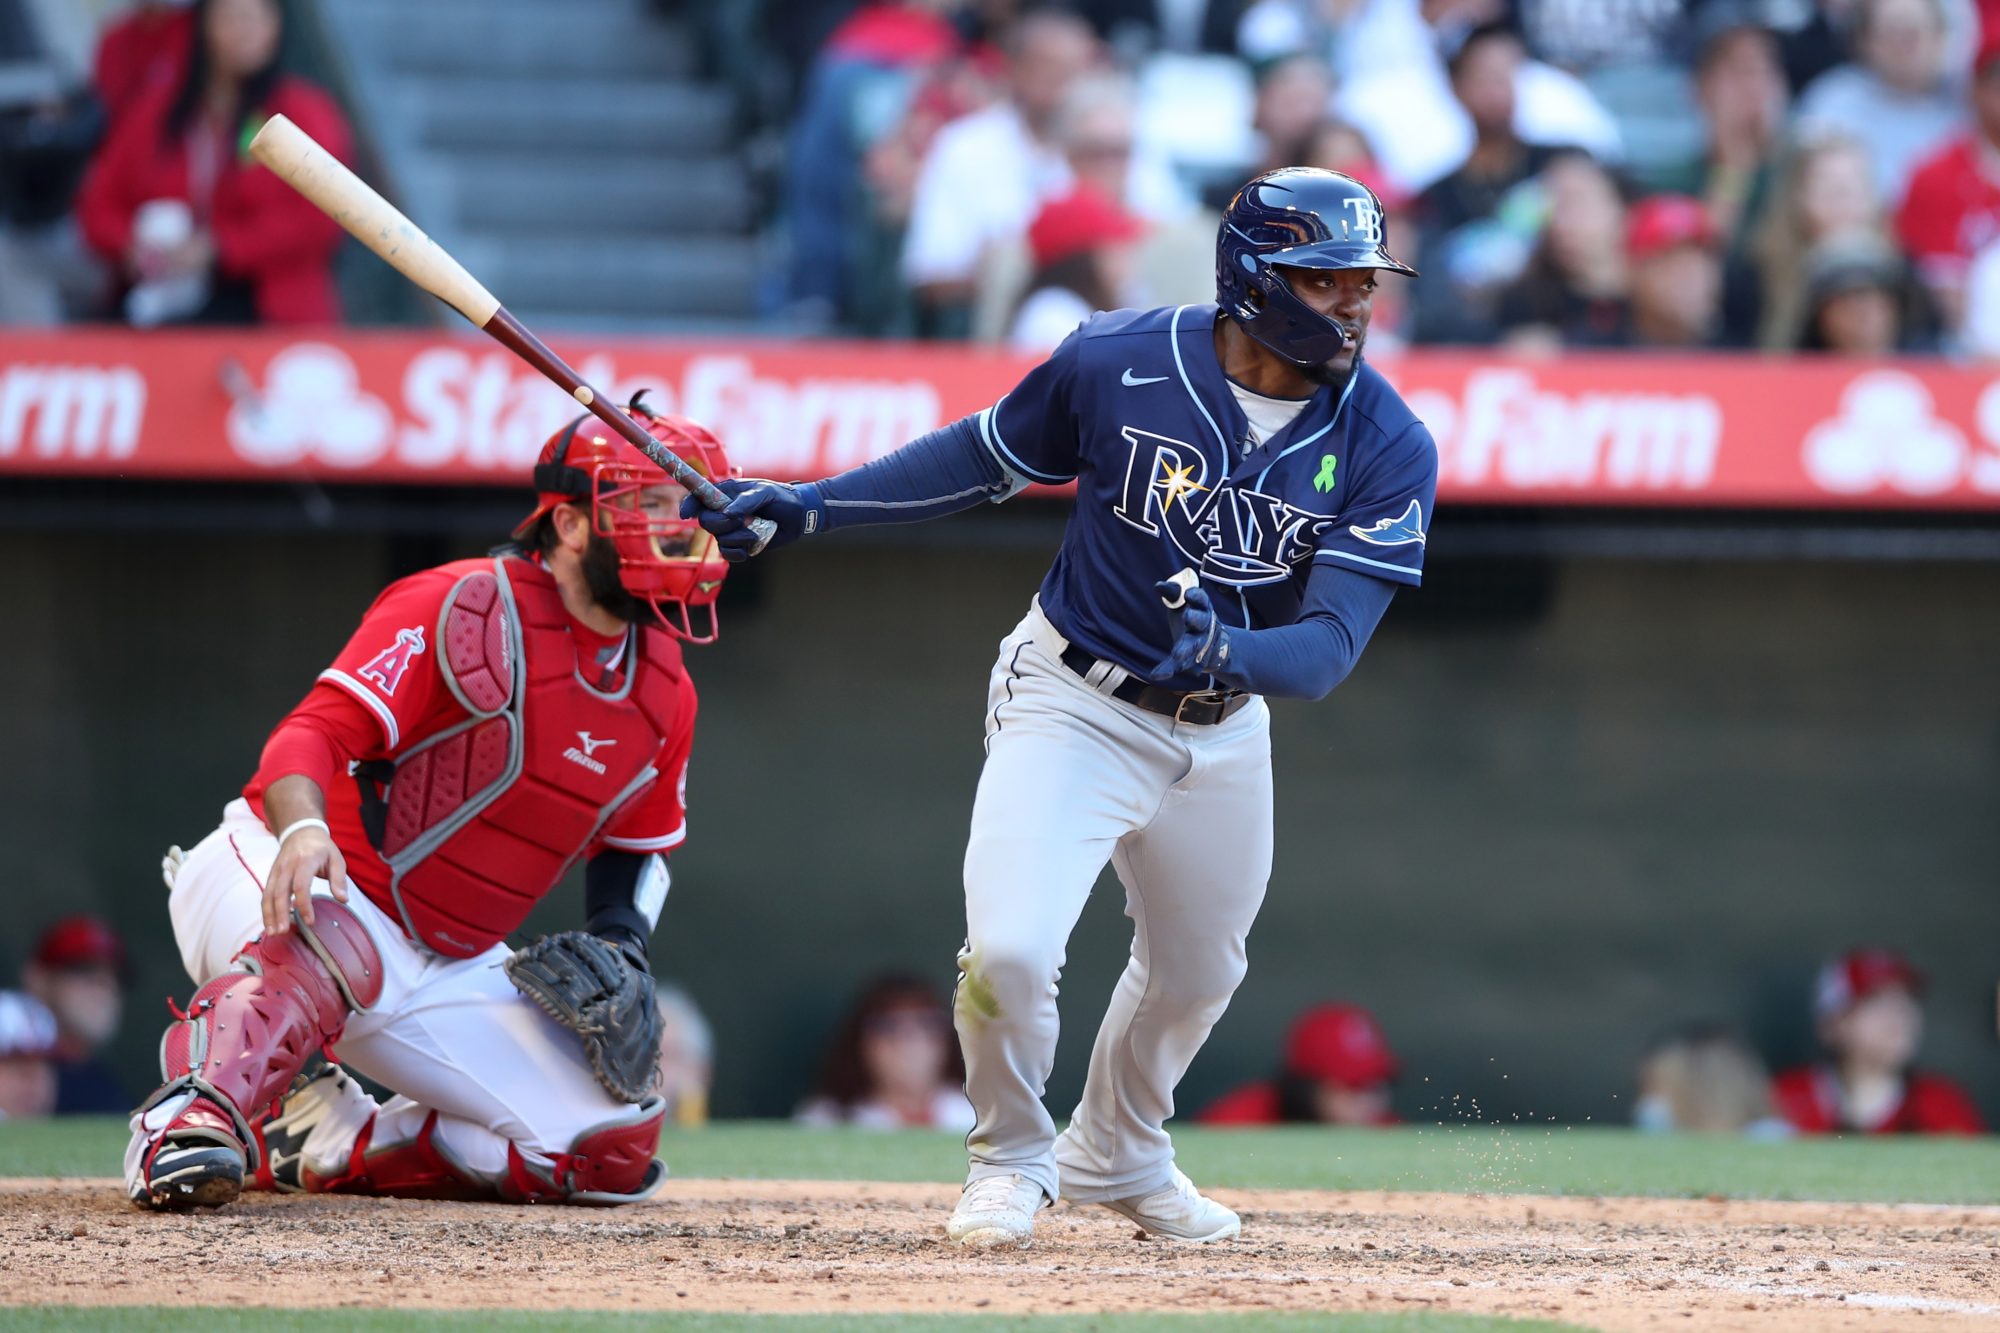 Vidal Bruján #7 of the Tampa Bay Rays bats during the game against the Los Angeles Angels at Angel Stadium of Anaheim on May 11, 2022